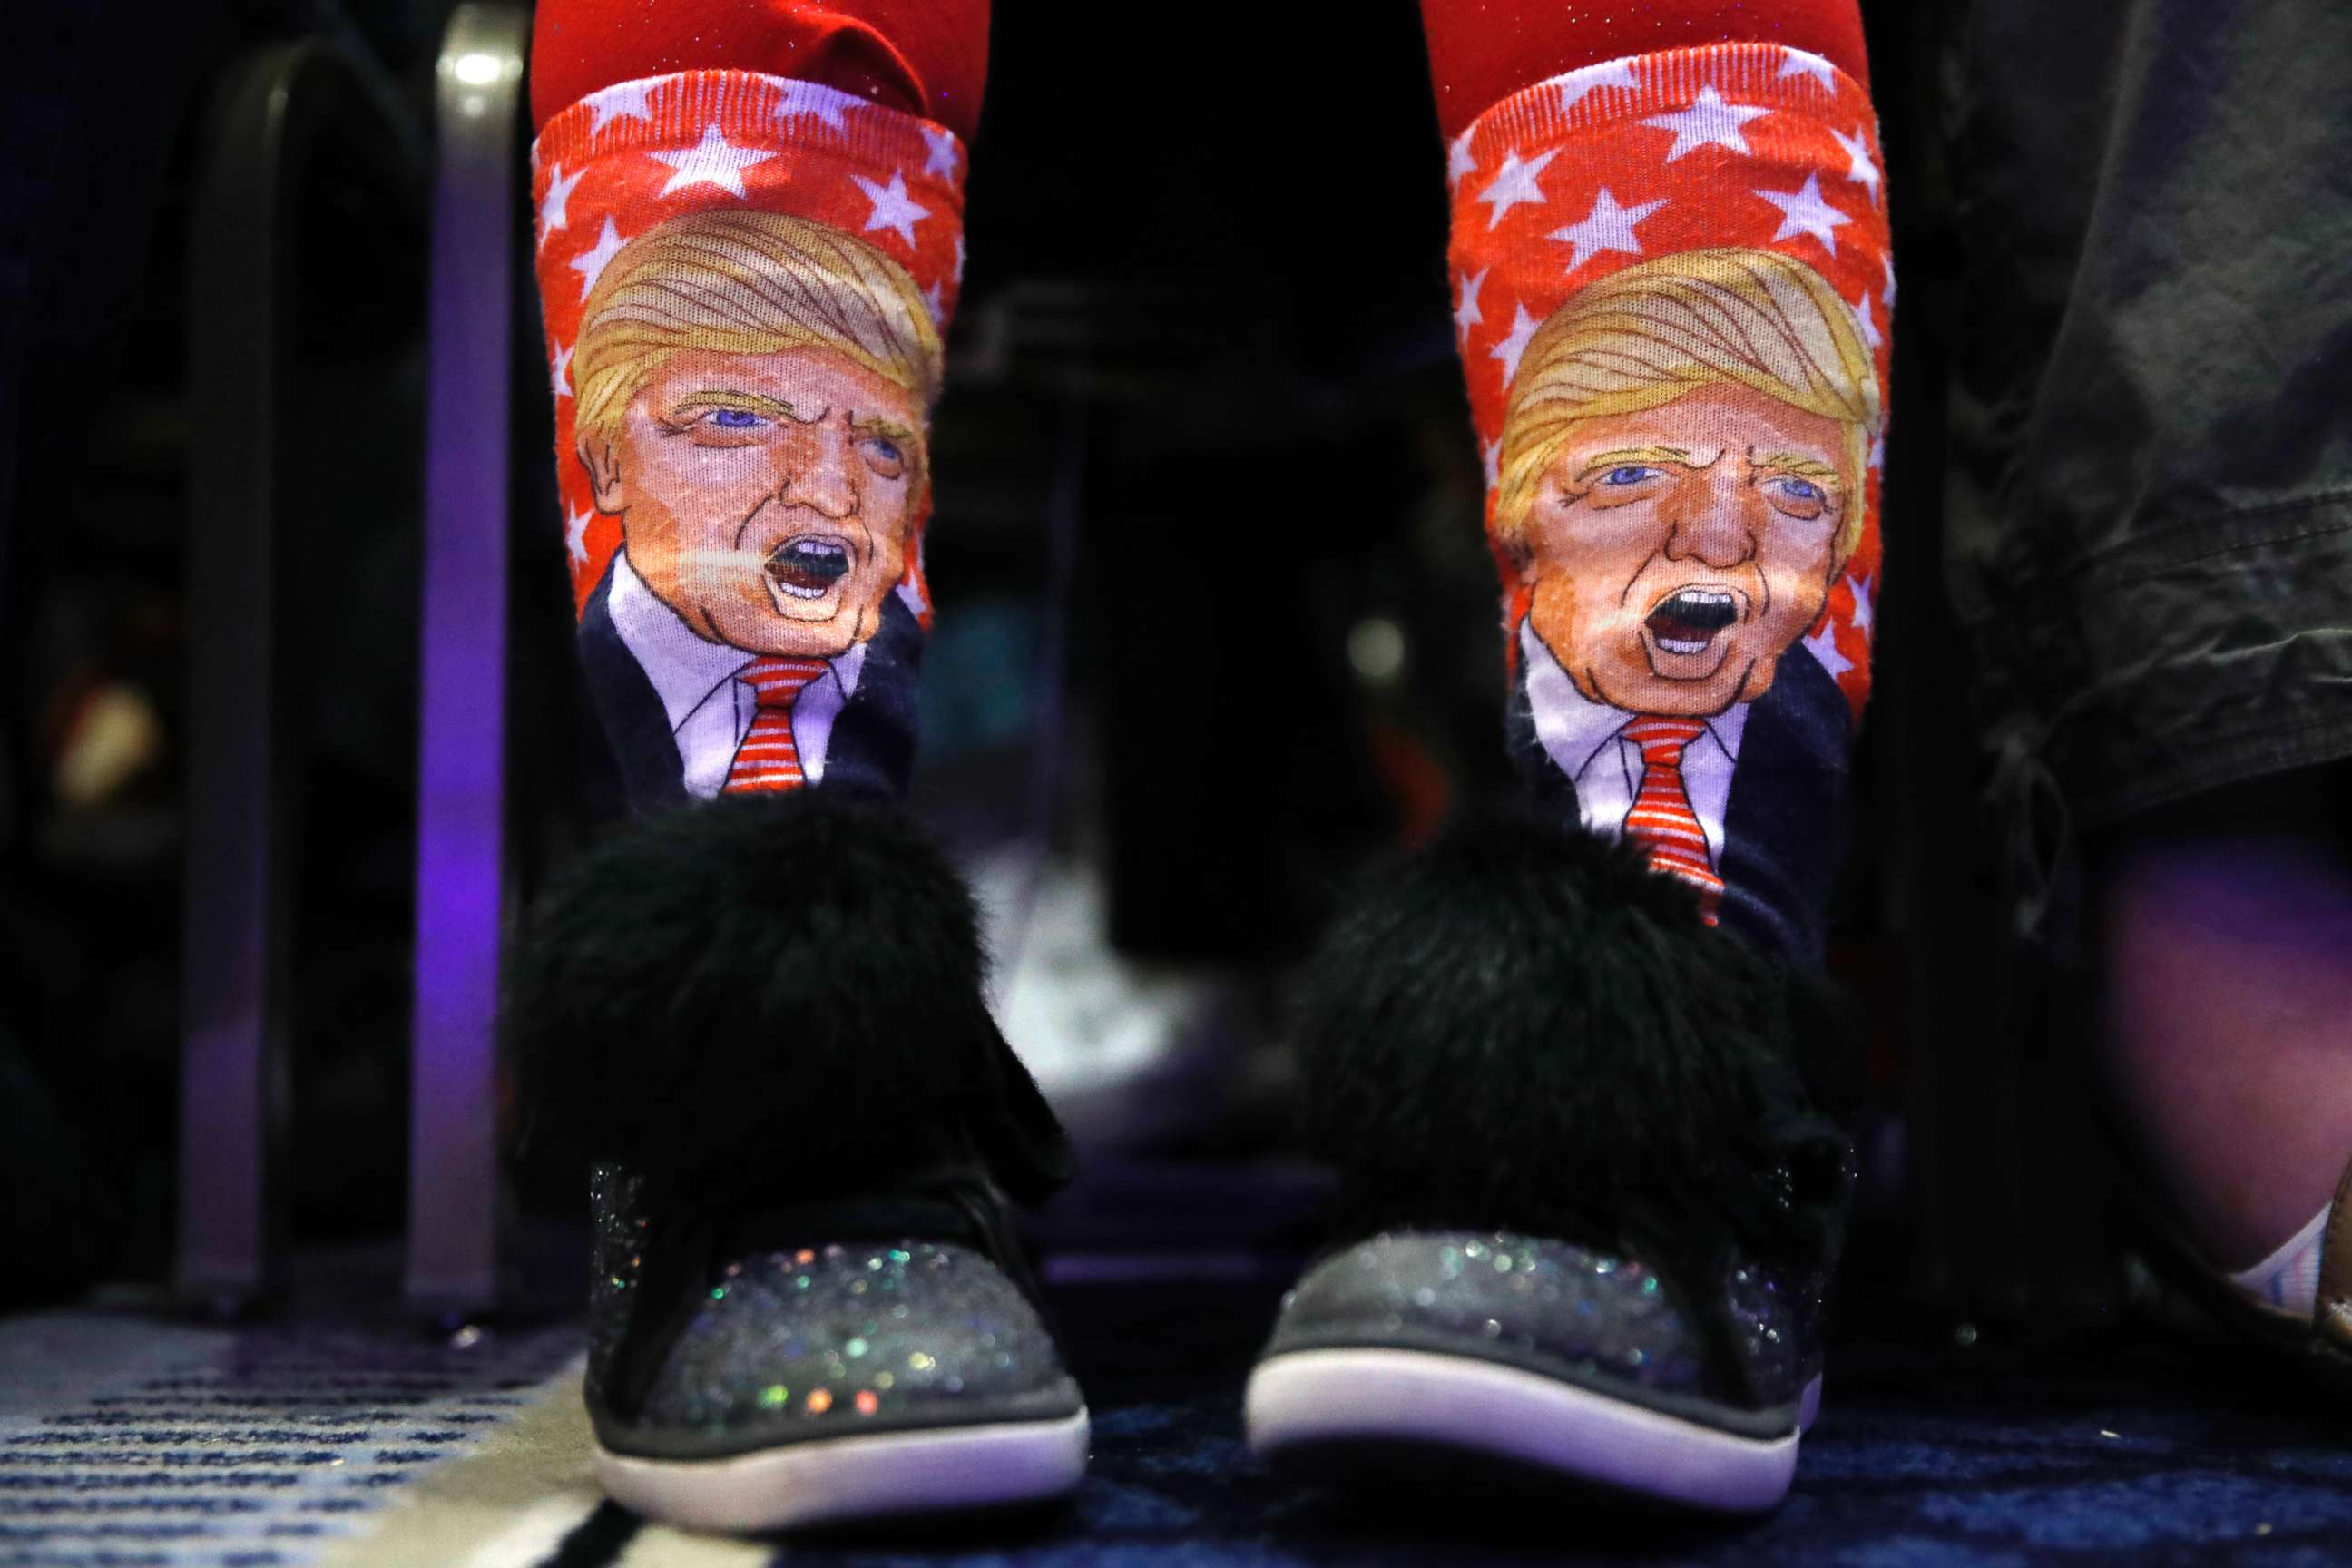 PHOTO: Millie March, 12, of Fairfax, Va., wears socks featuring President Donald Trump while awaiting his speech to the Conservative Political Action Conference, at National Harbor, Md., Feb. 23, 2018.